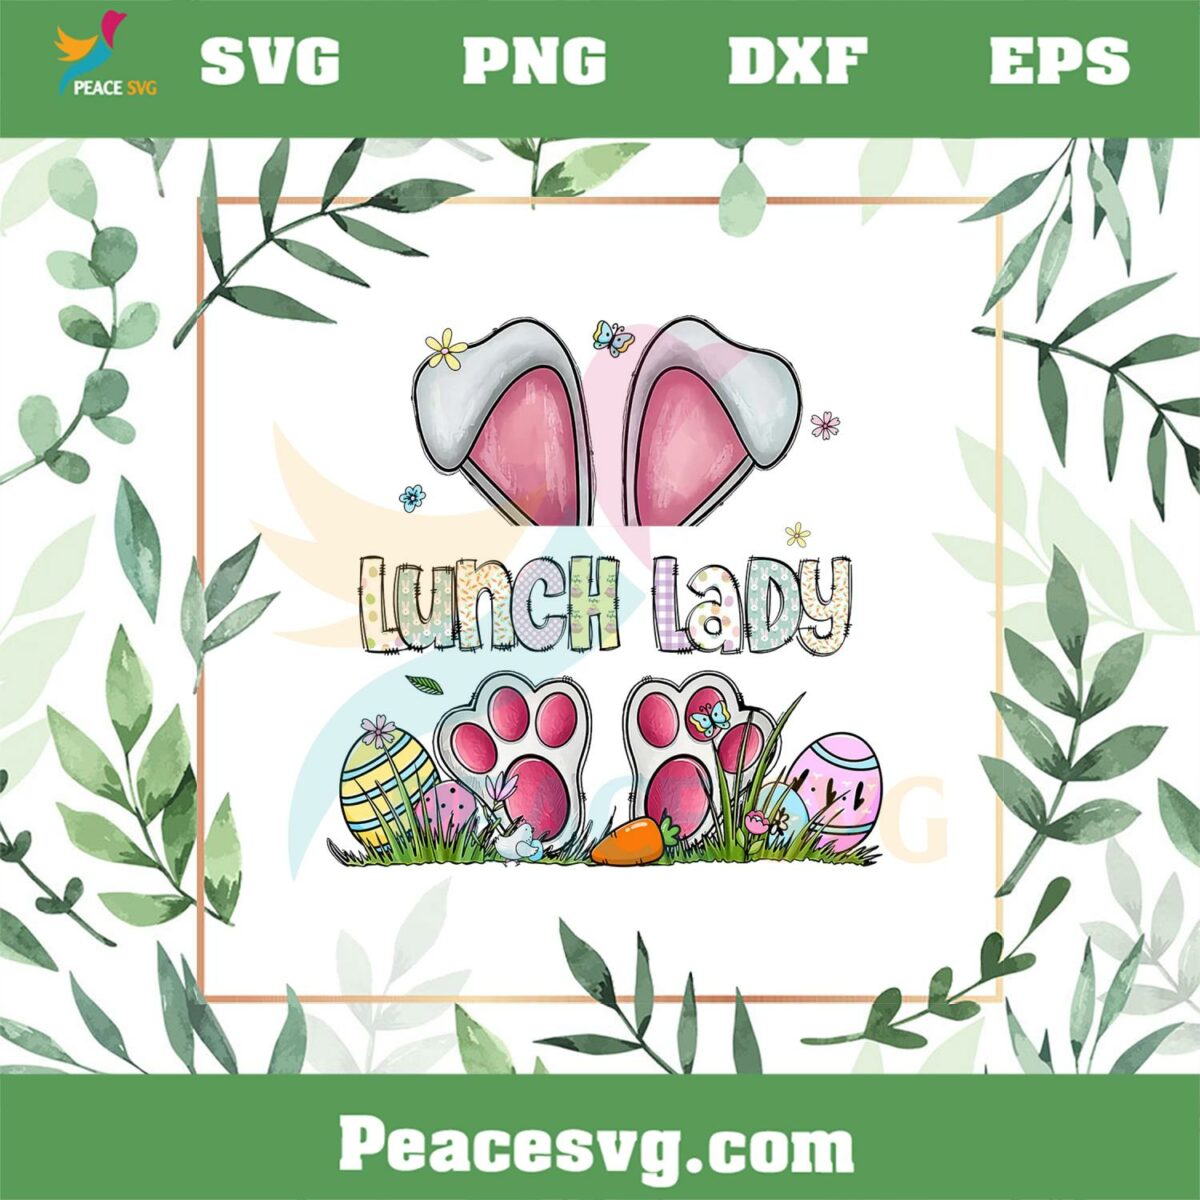 Cute Easter Lunch Lady Bunny Ear PNG Sublimation Designs